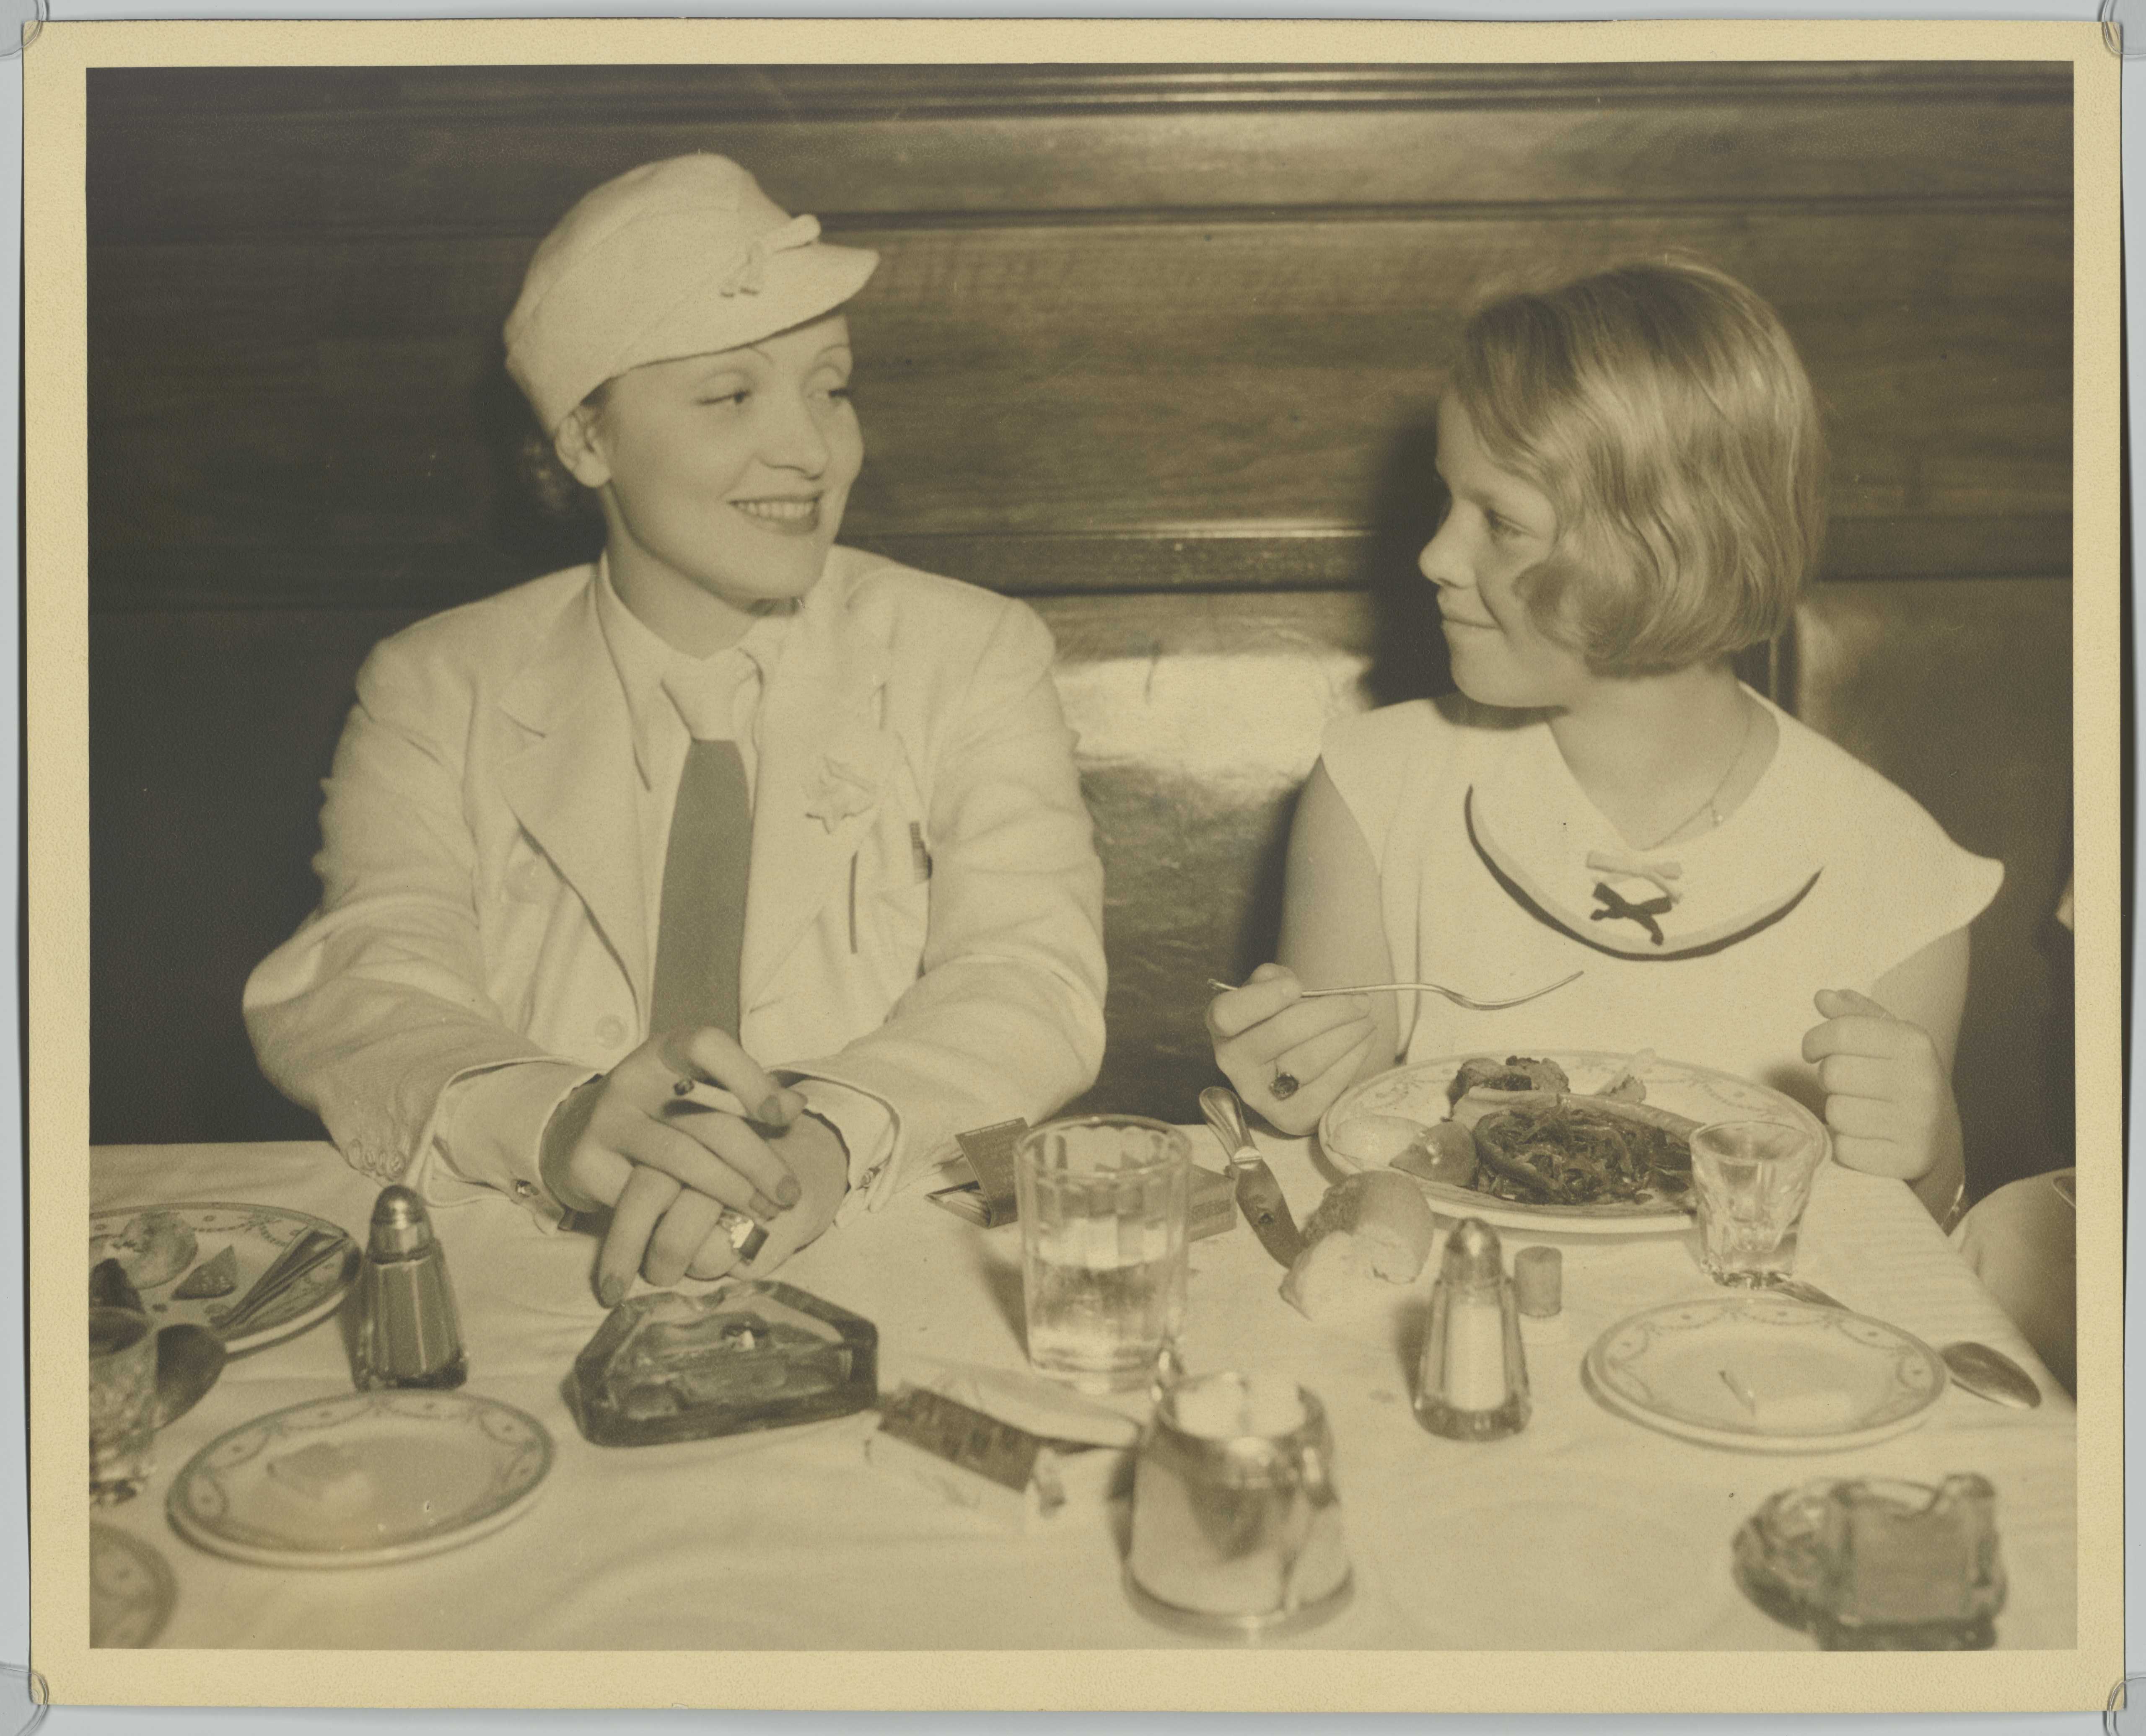 Marlene Dietrich visits a restaurant with daughter Maria, Los Angeles, March 1934